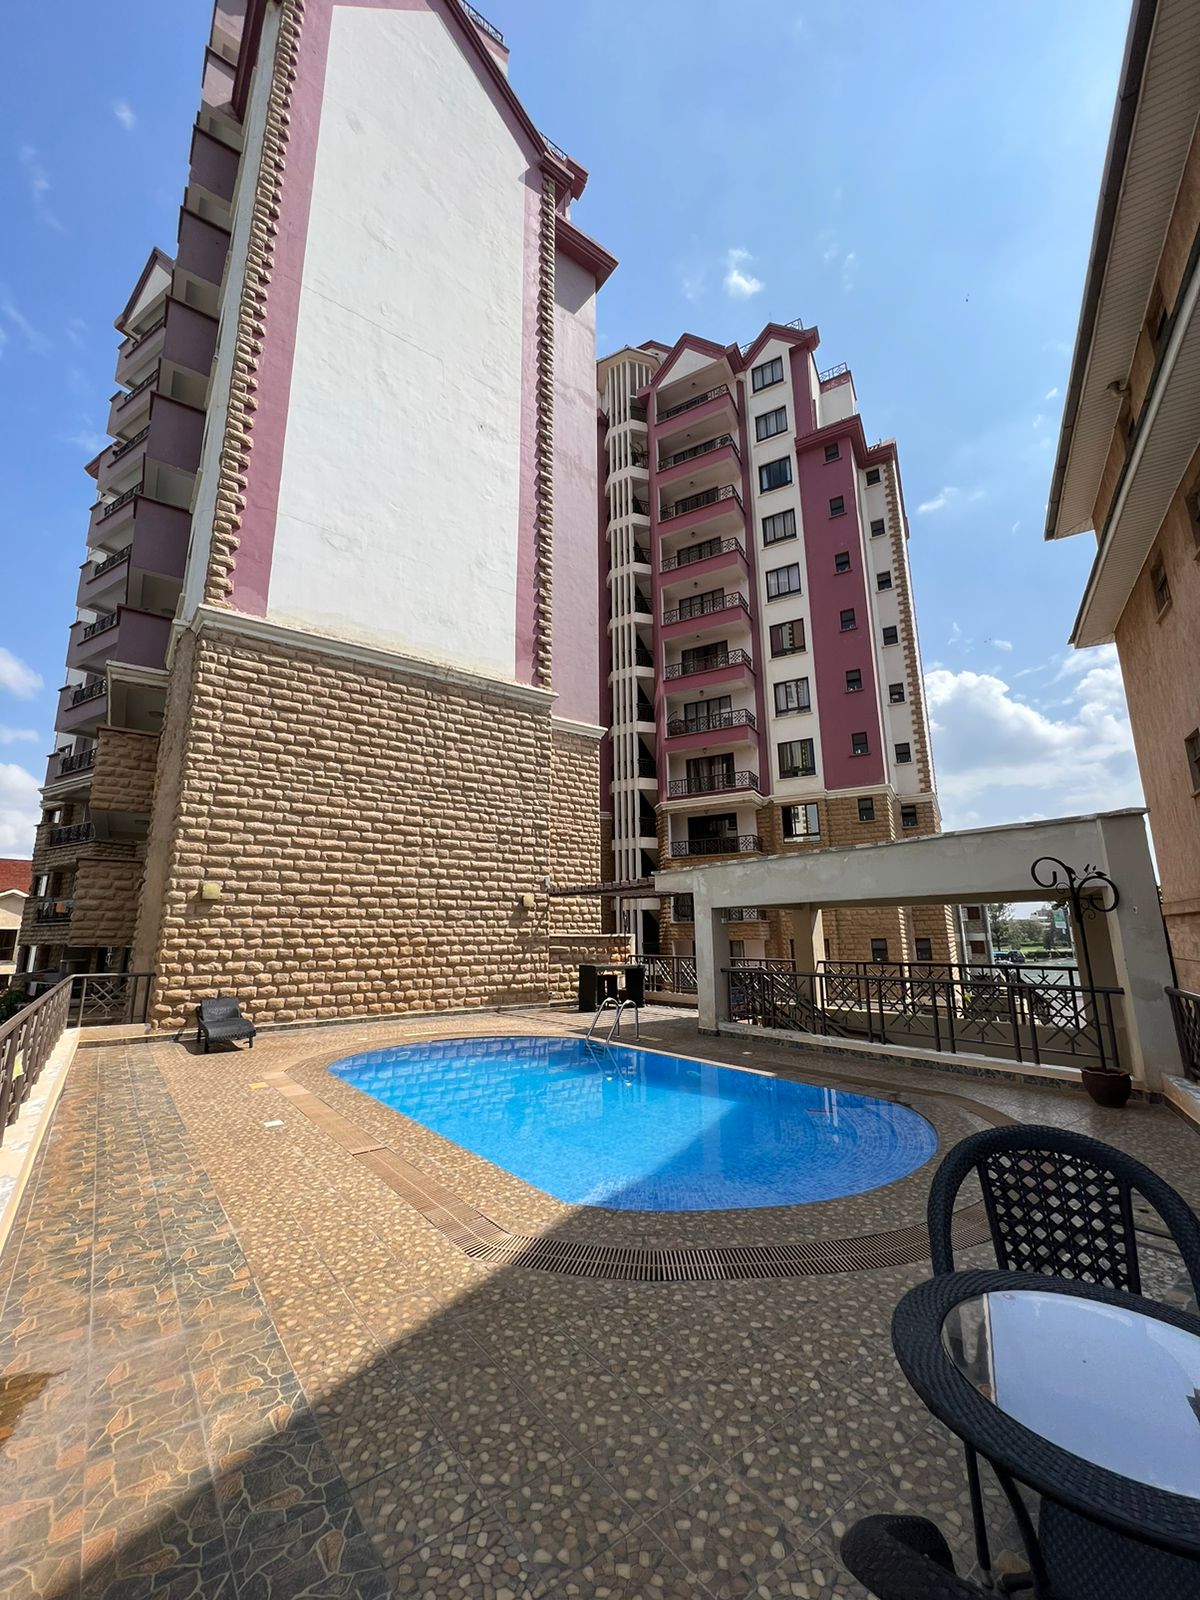 2 bedroom apartment to let located On ngong road. Gym Swimming pool. Full back up generator. Rent per month 85,000. Musilli Homes